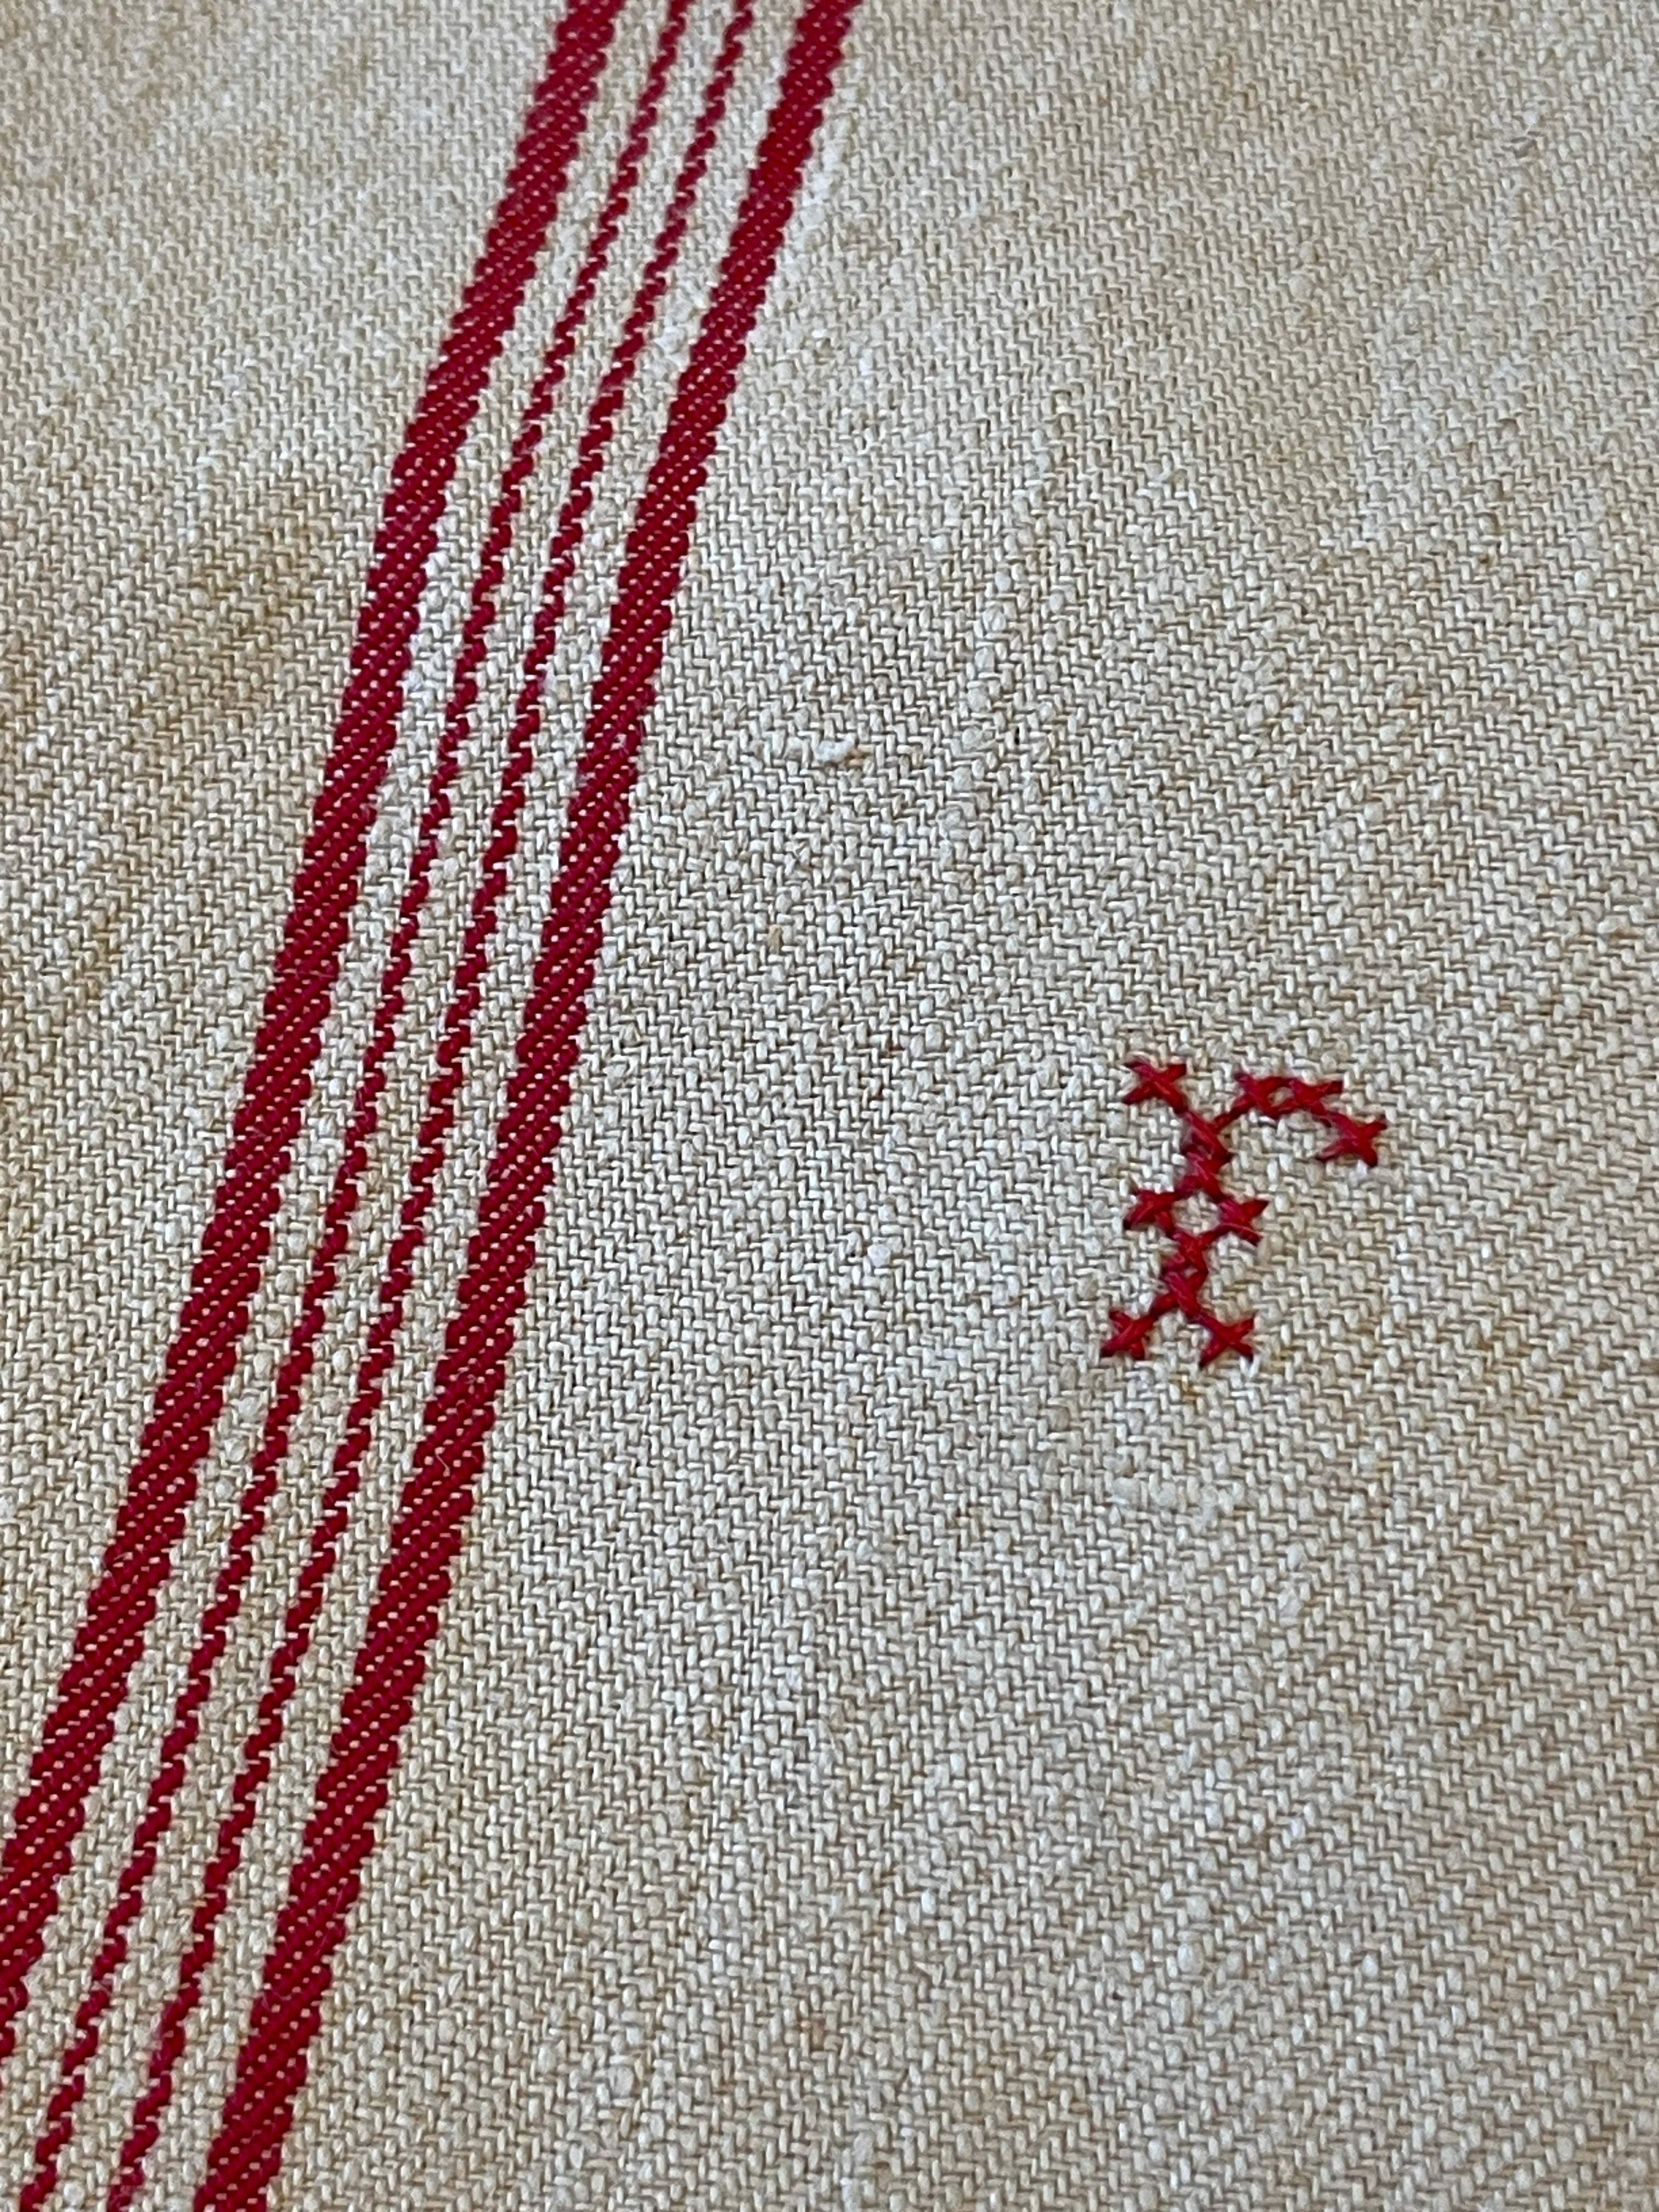 Antique Linen/Hemp Red Striped Torchon from the Farm Stitched F or R